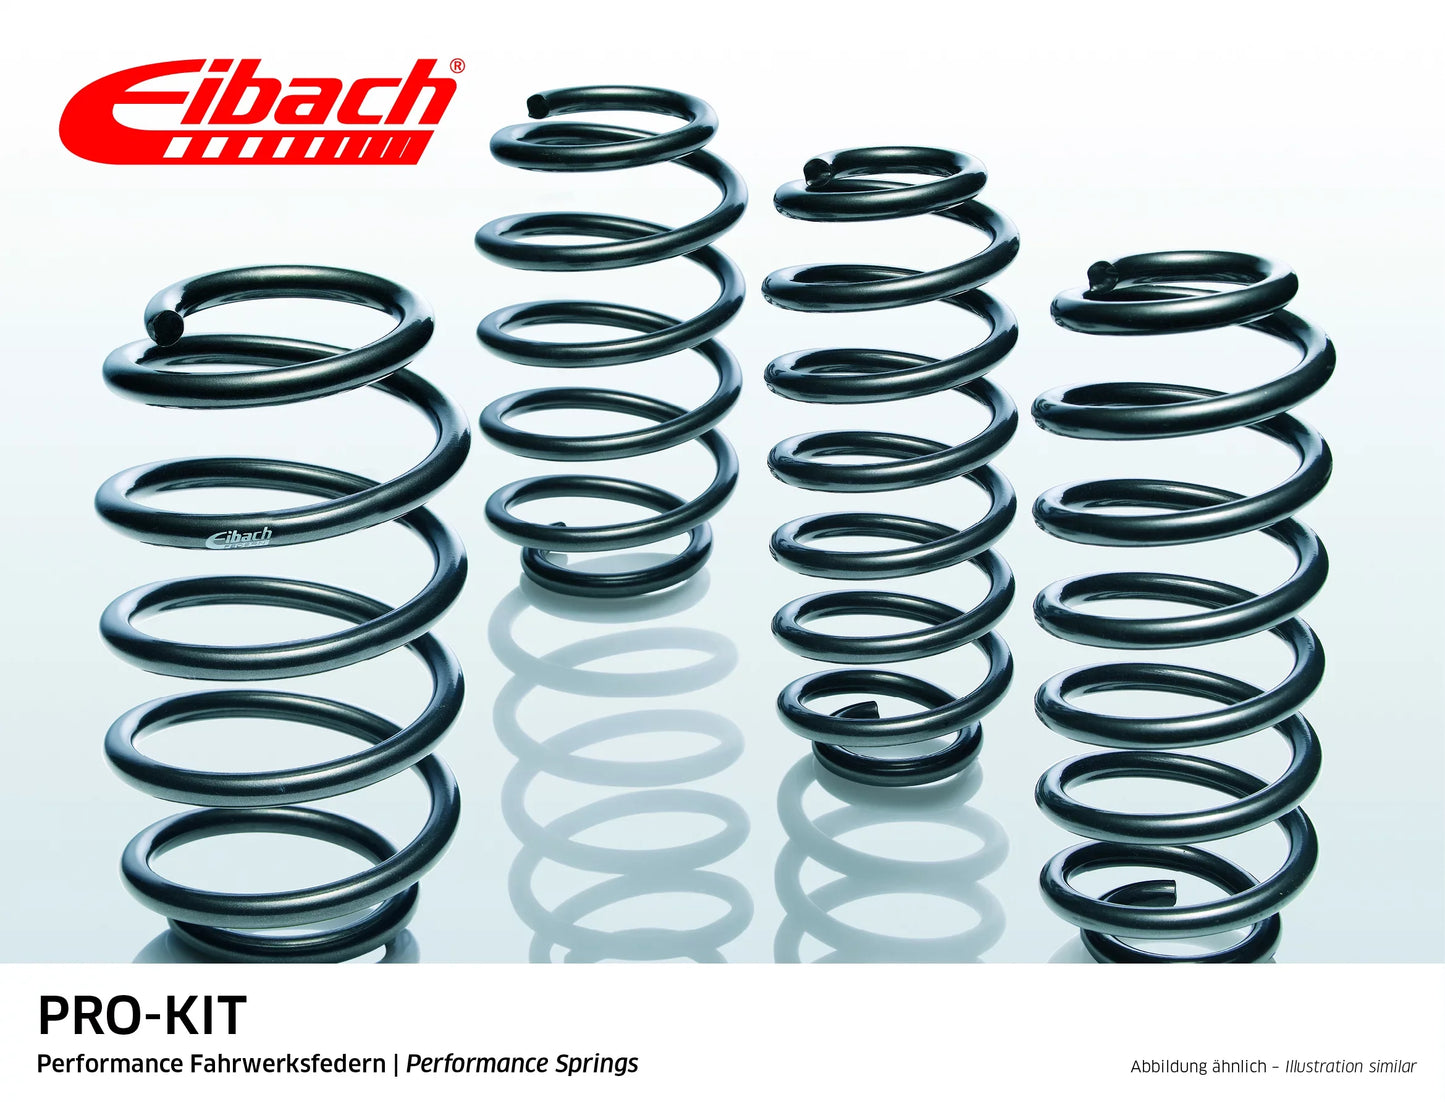 Eibach Pro-Kit Lowering Springs (E10-42-054-02-22) at £397.59